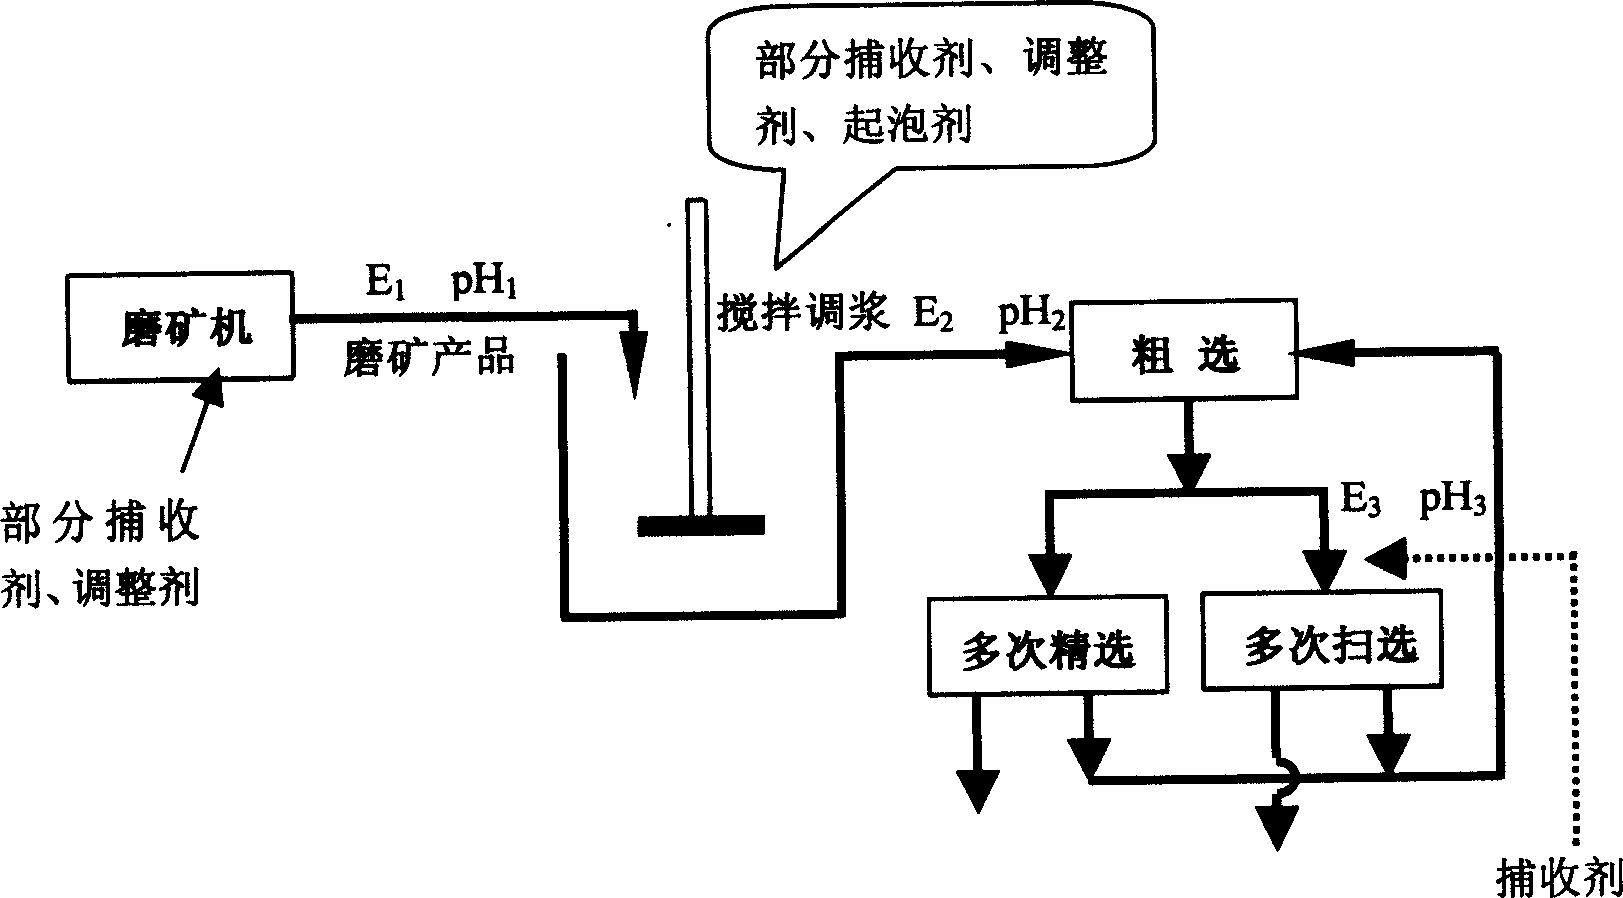 Lead and zinc sulfide ore in situ electric potential flotation process